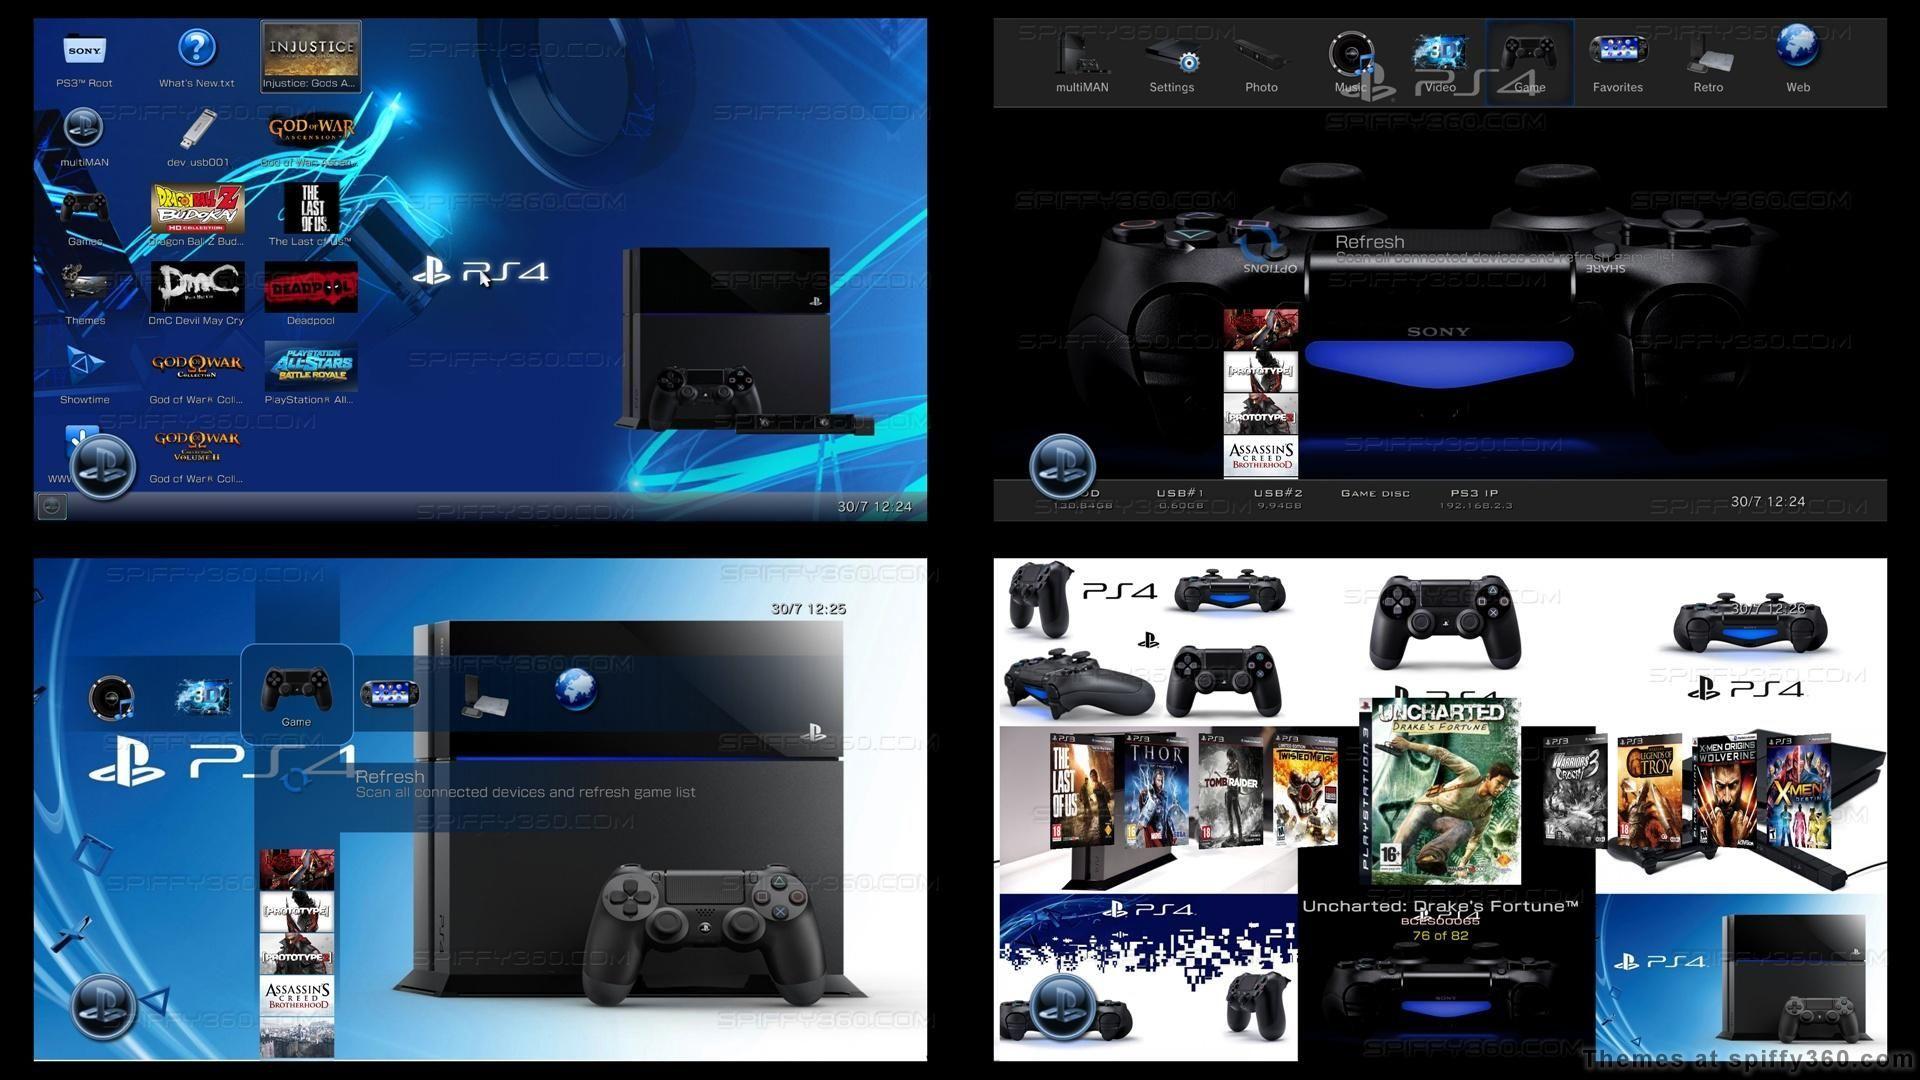 Ps3 Themes PLAYSTATION. Ps5 Theme ps3. Темы для ps3. Multiman ps3. Мультиман на ps3